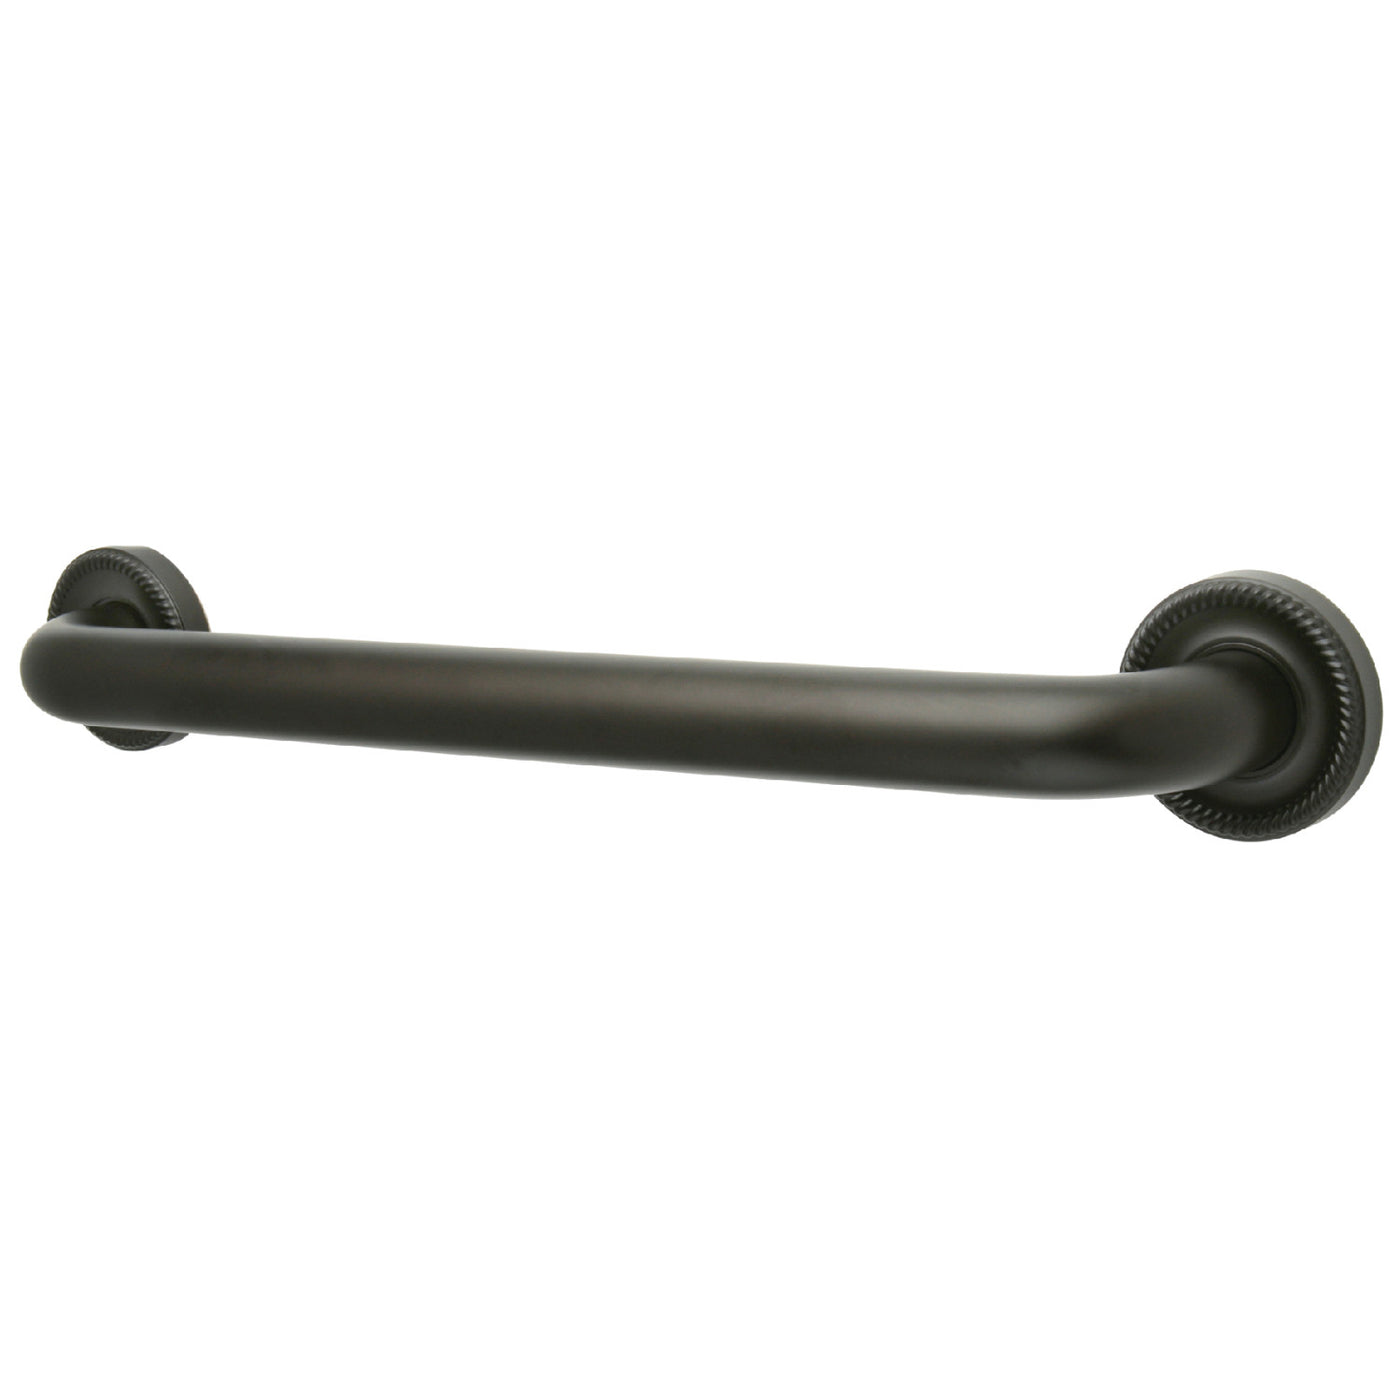 Elements of Design EDR914165 16-Inch x 1-1/4-Inch O.D Grab Bar, Oil Rubbed Bronze